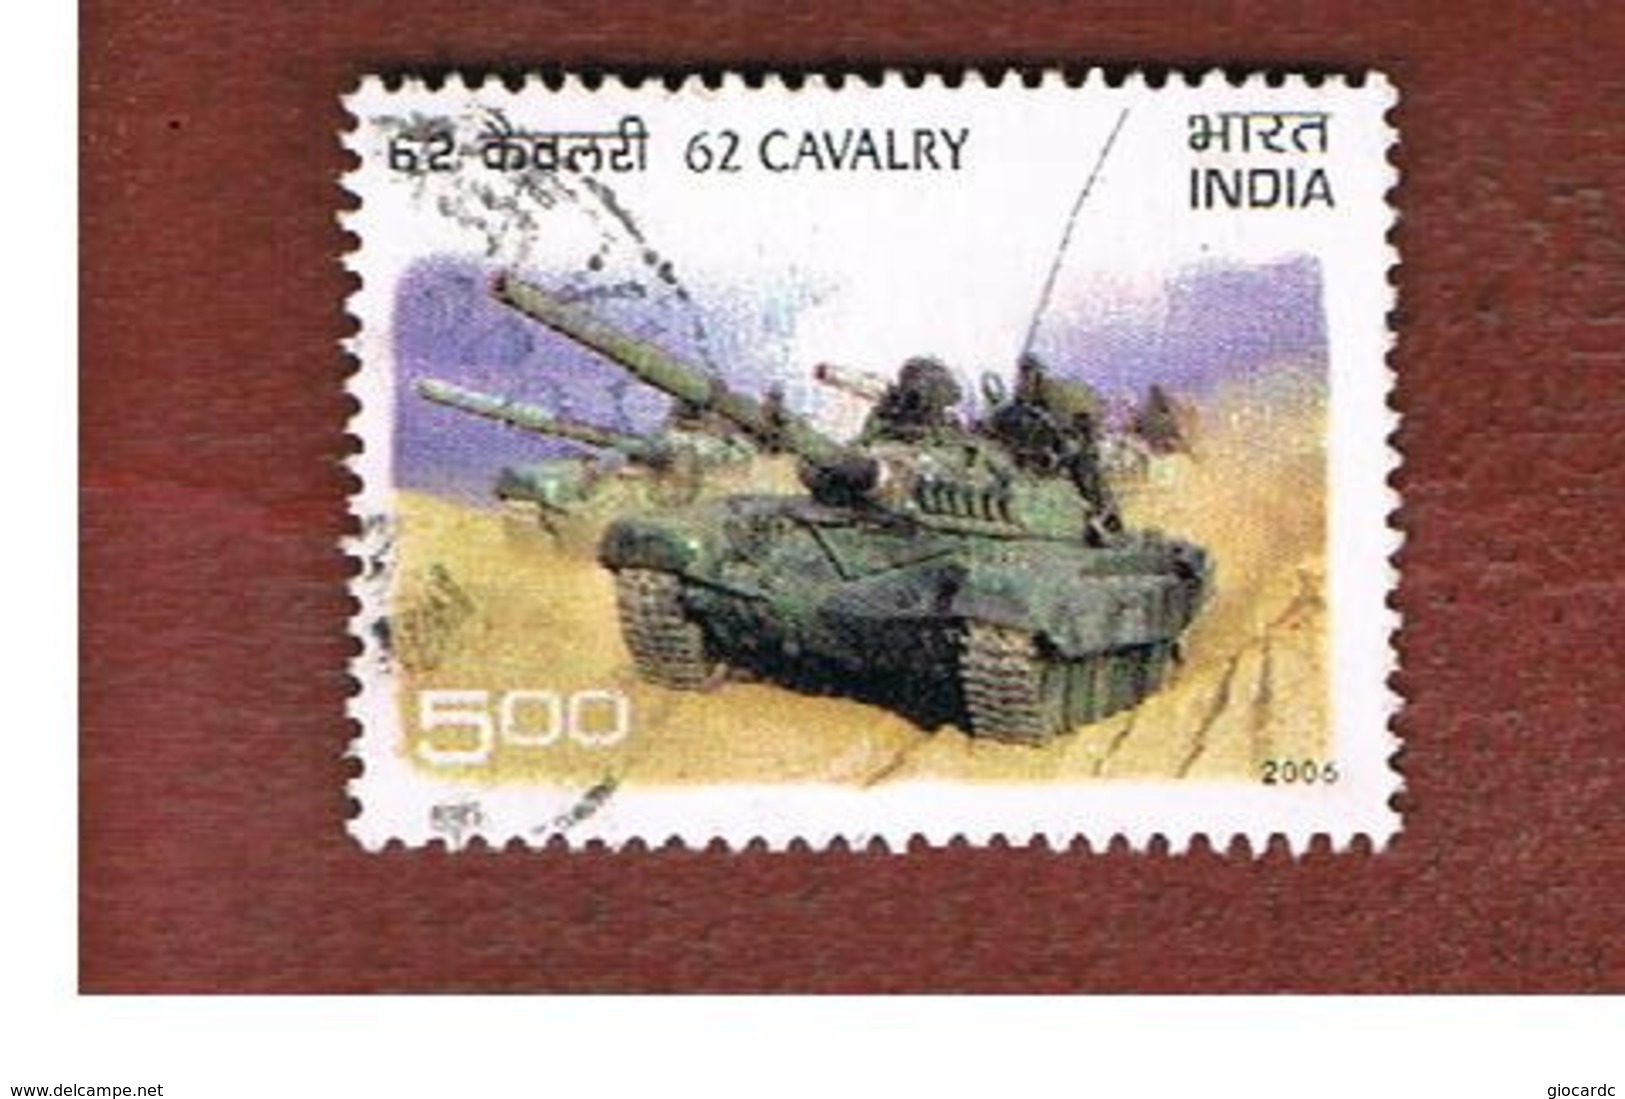 INDIA  - MI 2138  - 2006    ARMY: 62^ CAVALRY: TANK         -   USED - Used Stamps